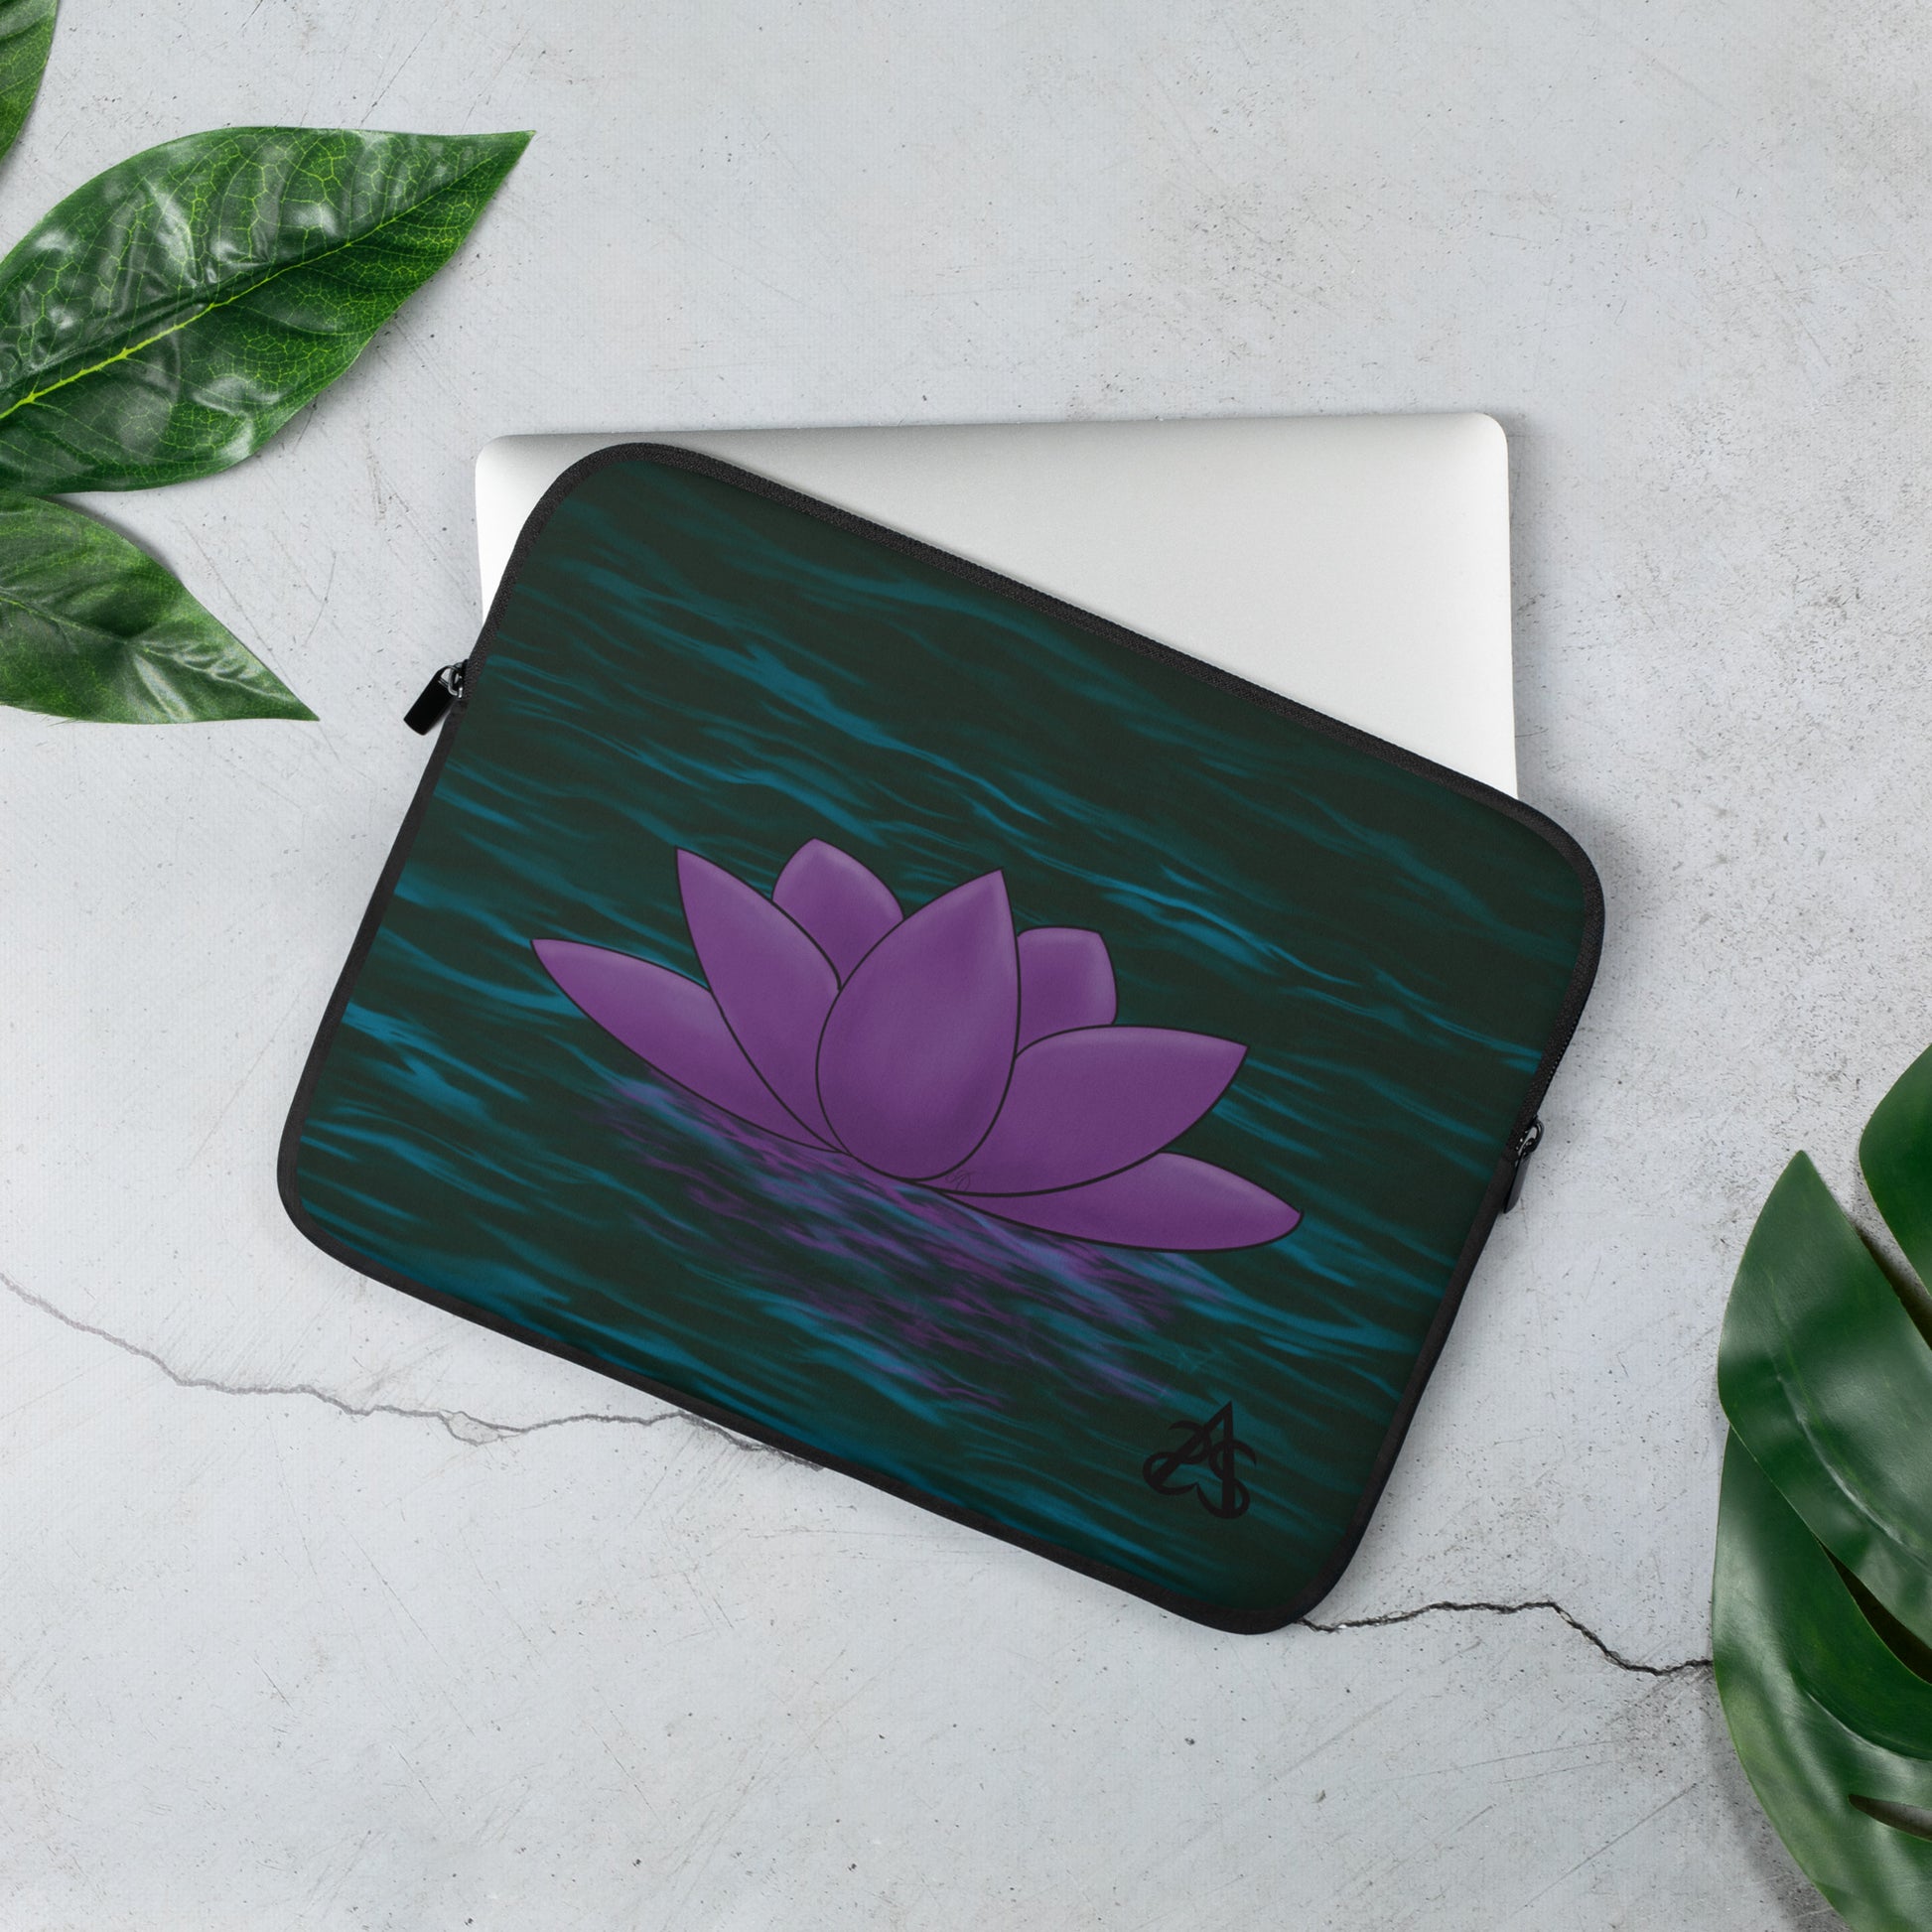 A laptop sleeve with a purple lotus flower on blue-green water.